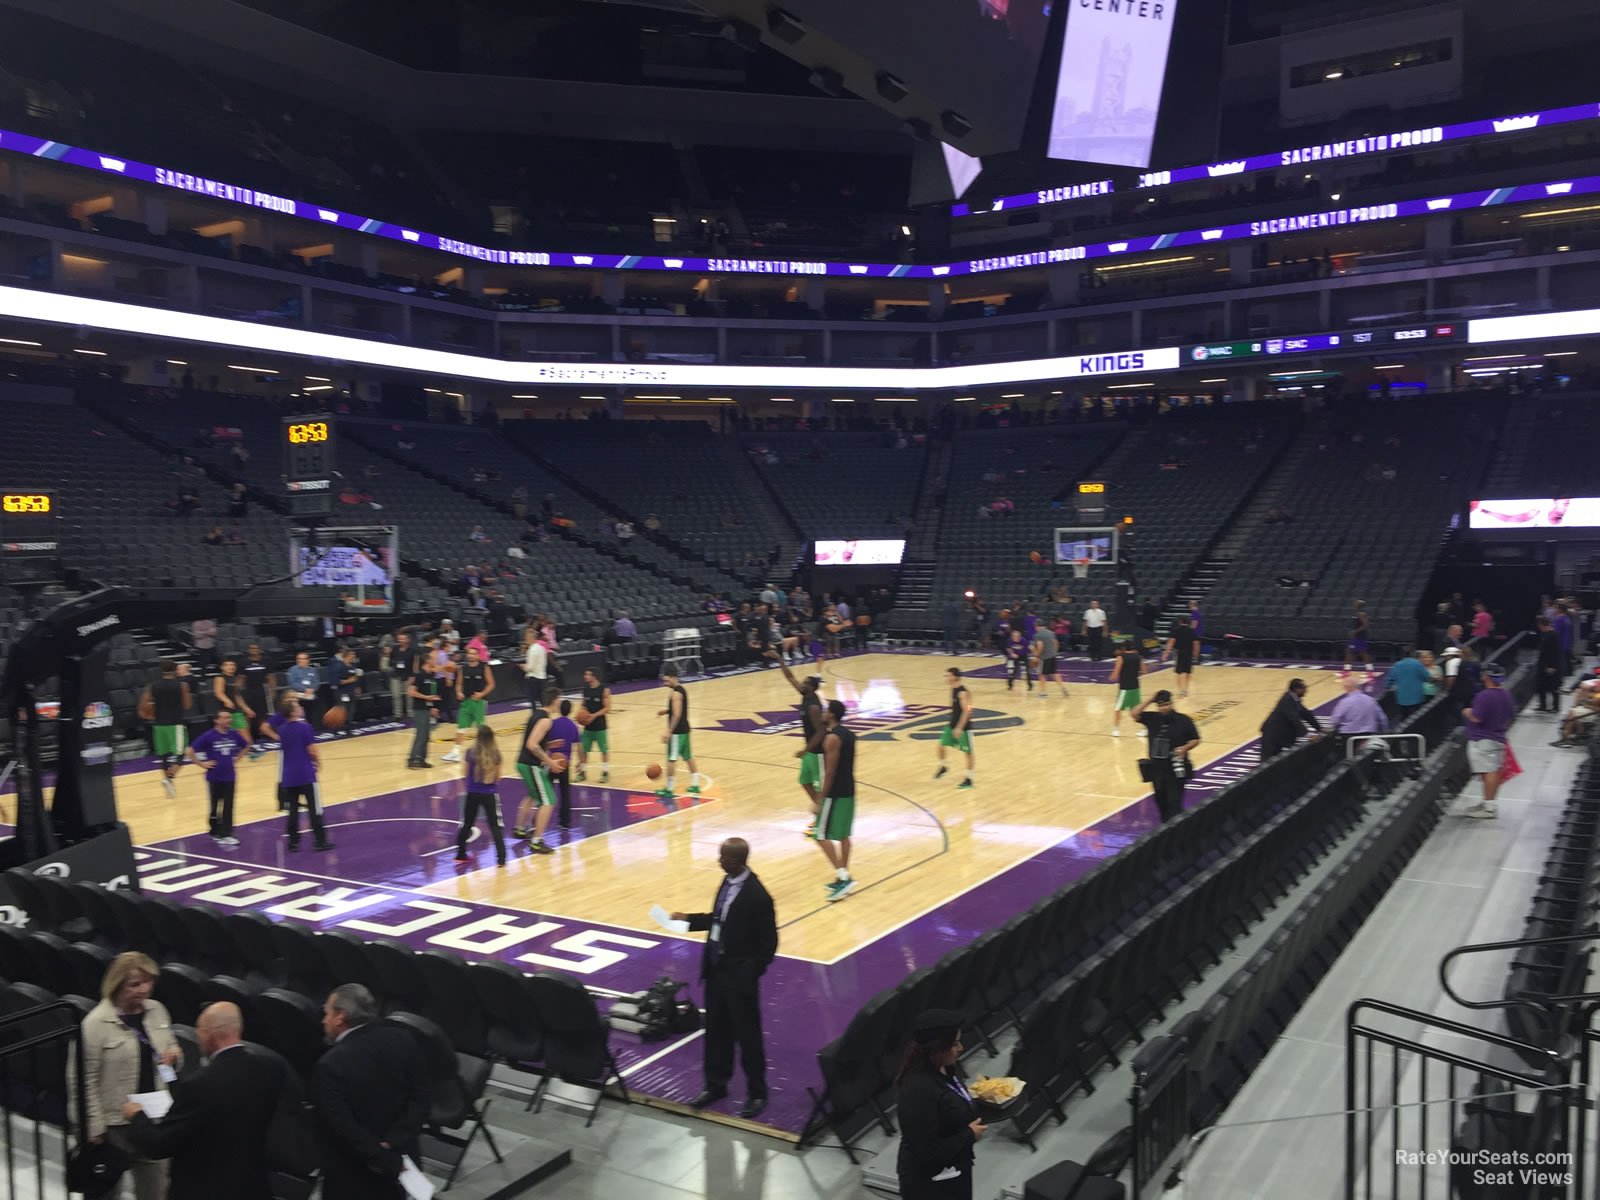 section 124, row dd seat view  for basketball - golden 1 center